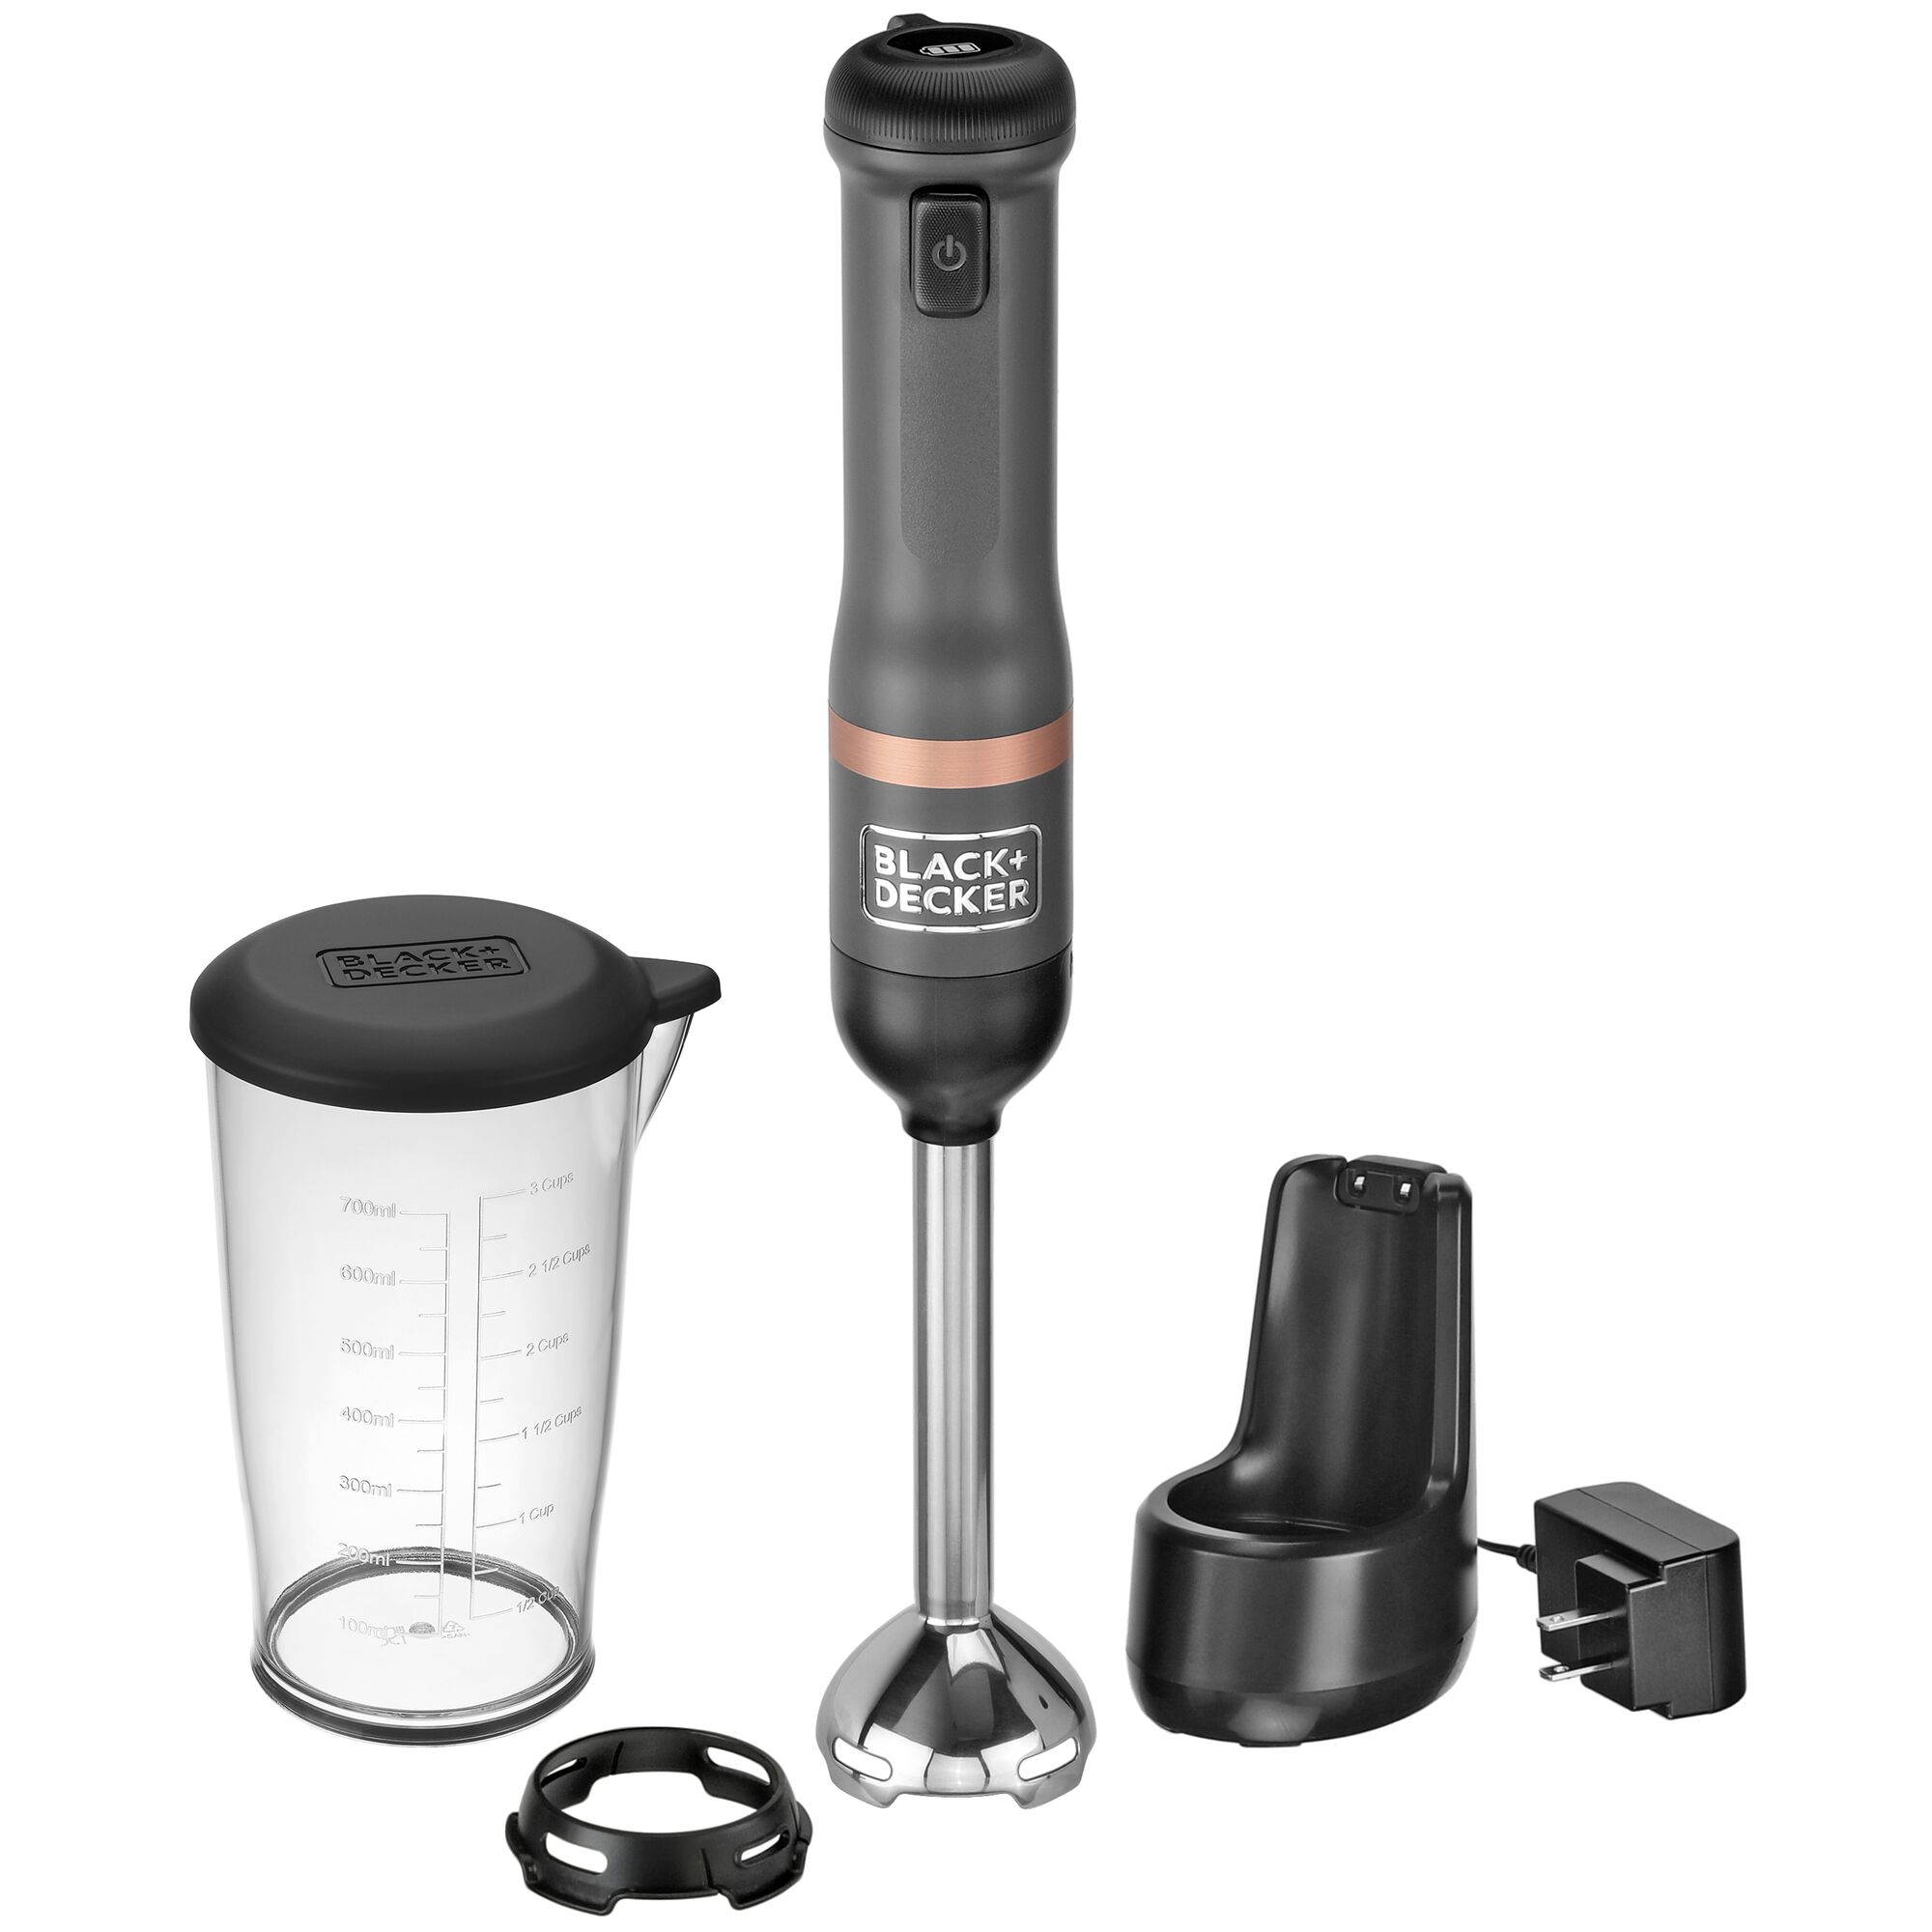 Front view of BLACK+DECKER kitchen wand Cordless Immersion Blender kit in grey